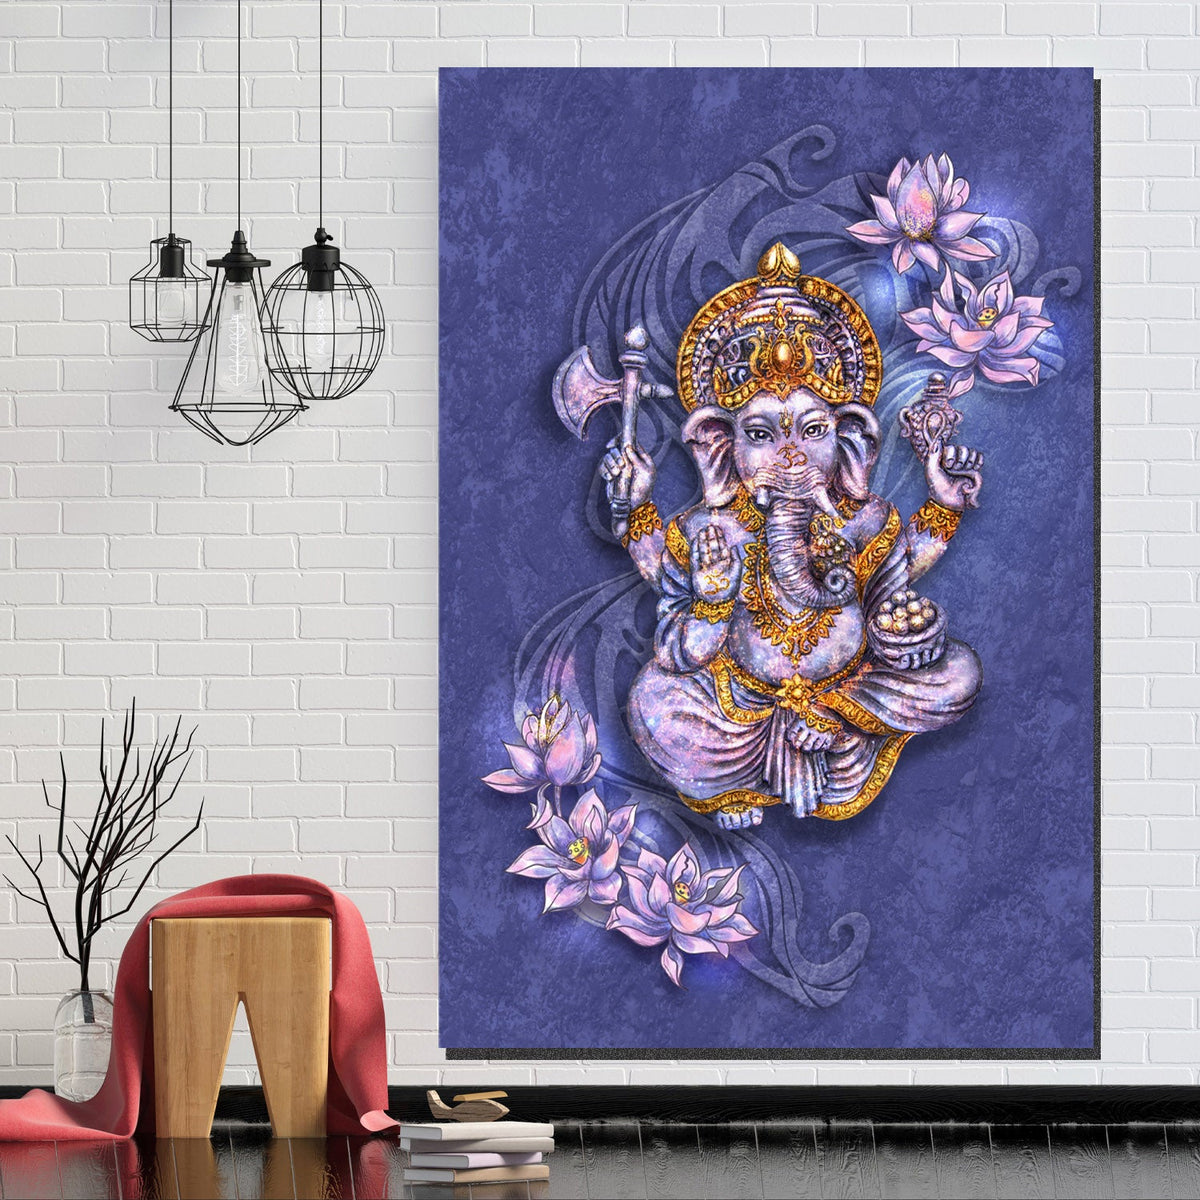 https://cdn.shopify.com/s/files/1/0387/9986/8044/products/FourArmsGaneshaCanvasArtprintStretched-1.jpg